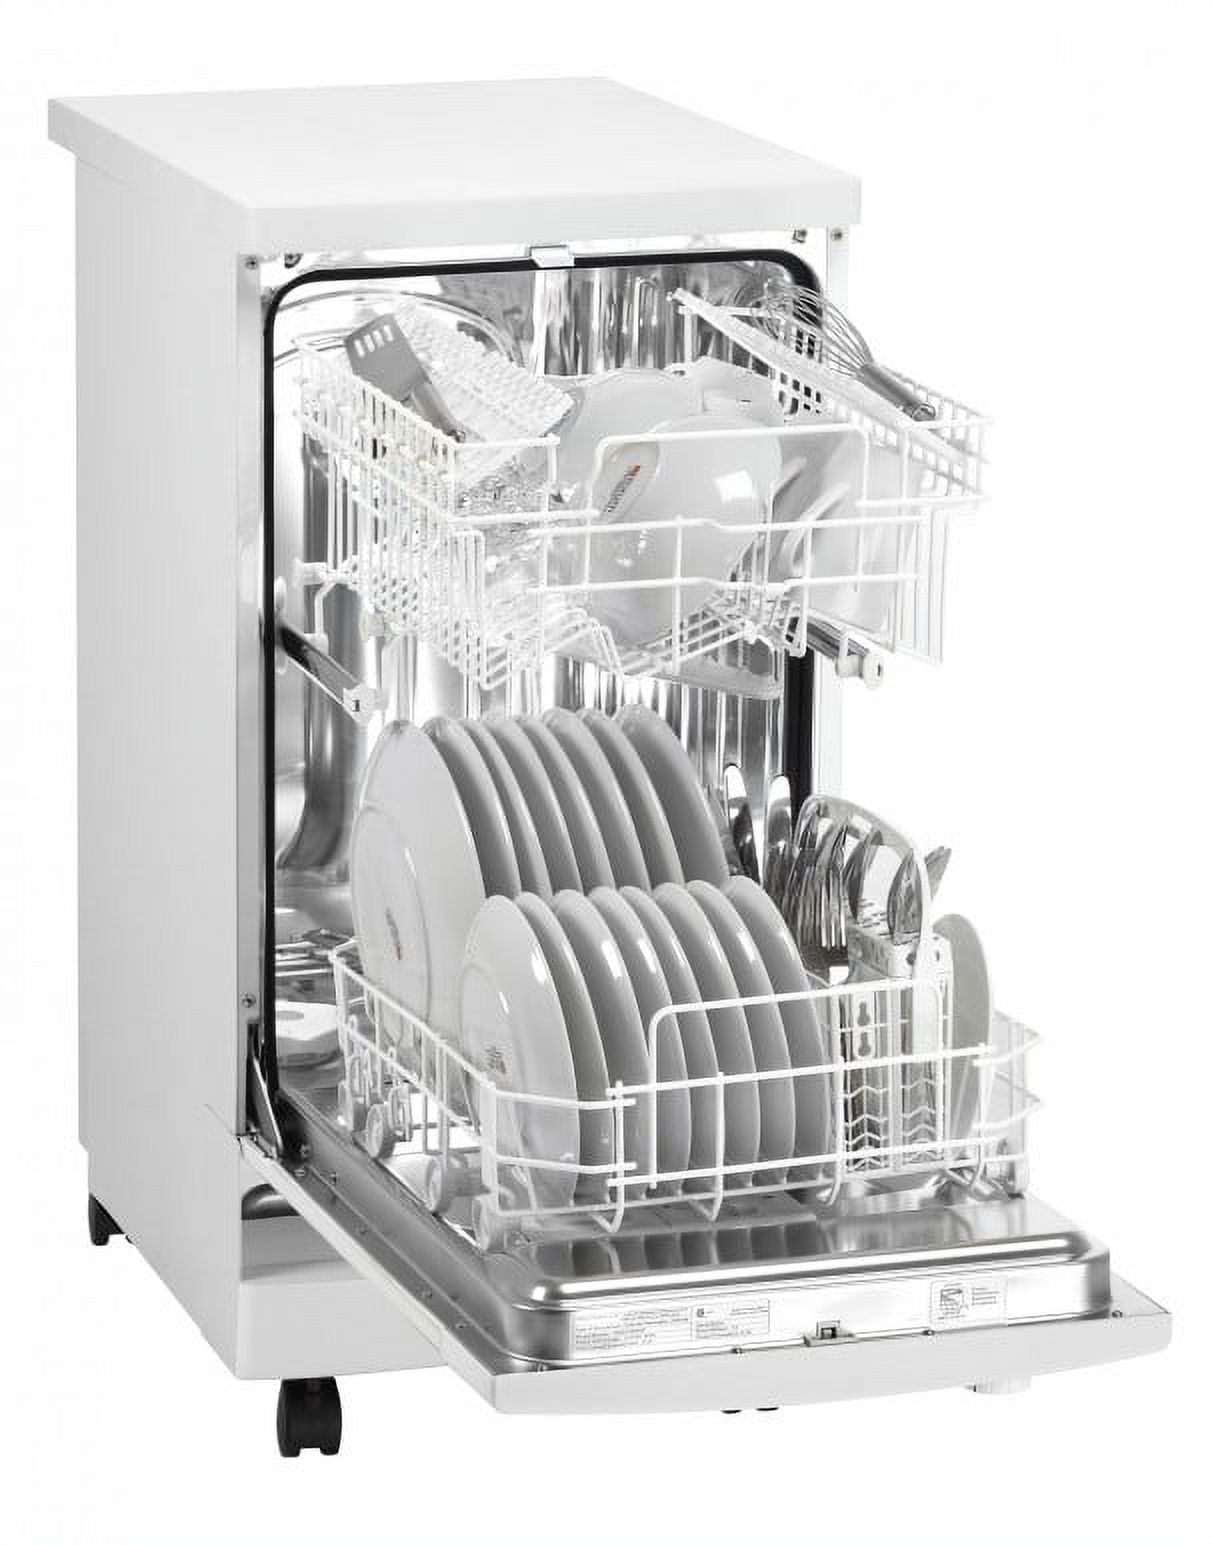 Danby 18" Portable Dishwasher in White - image 2 of 4